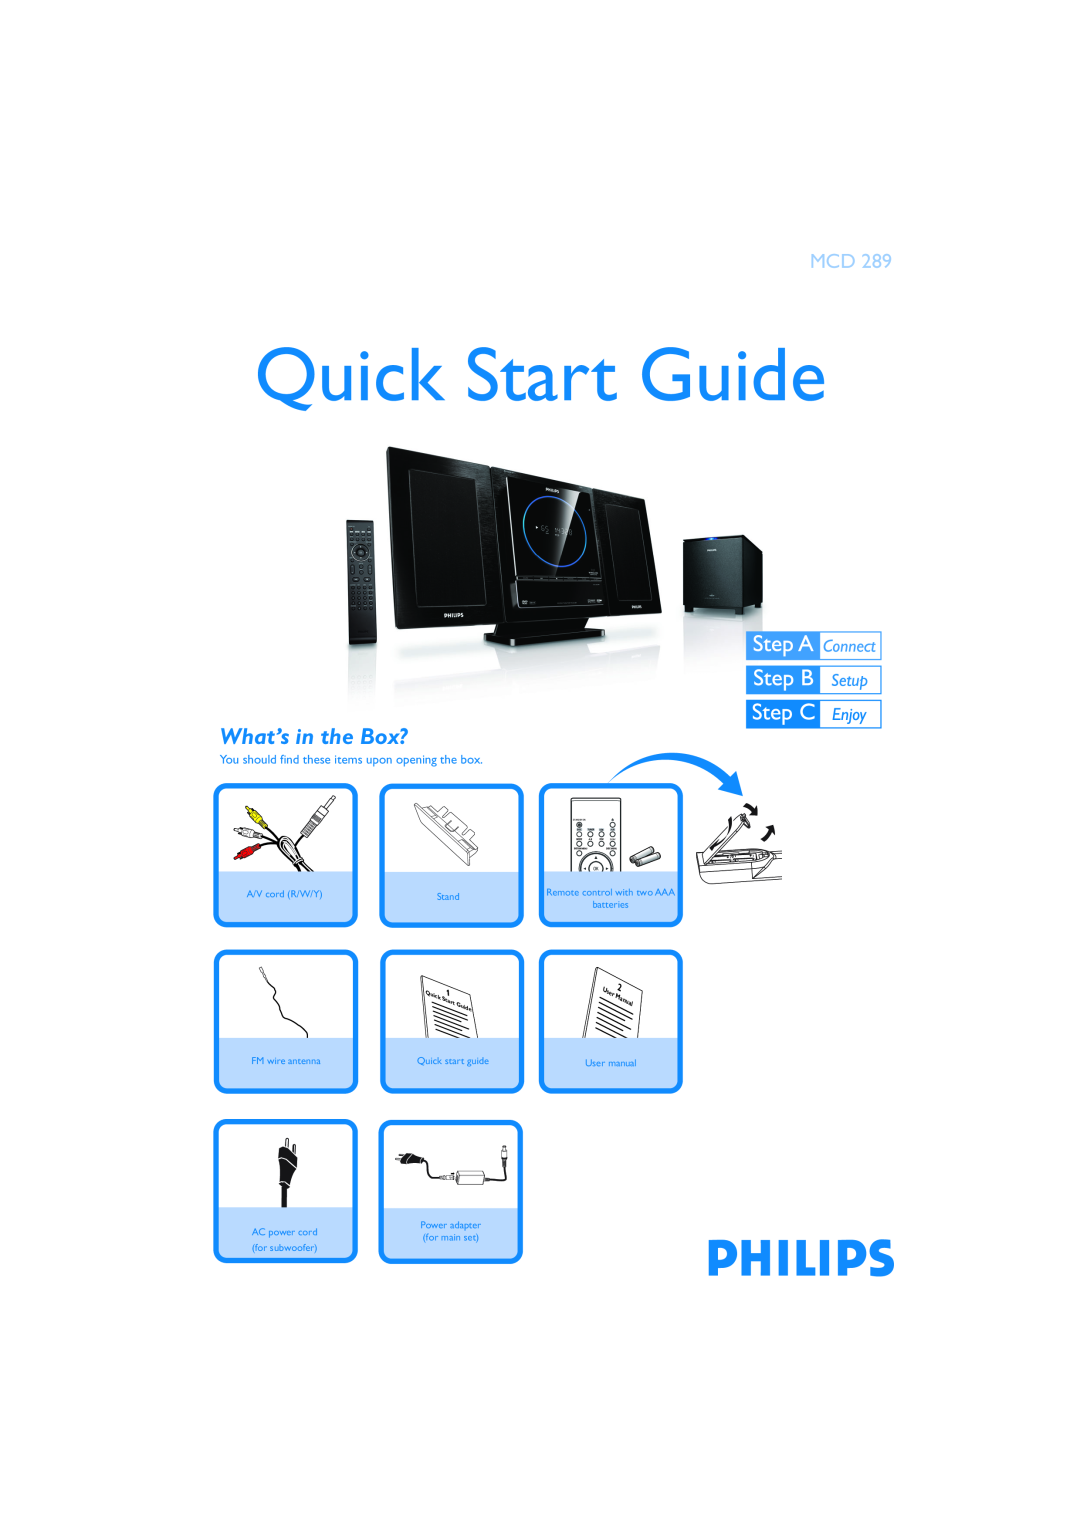 Philips PDCC-JS/JW-0807 quick start What’s in the Box?, Quick Start Guide, A/V cord R/W/Y, Stand, batteries, User manual 